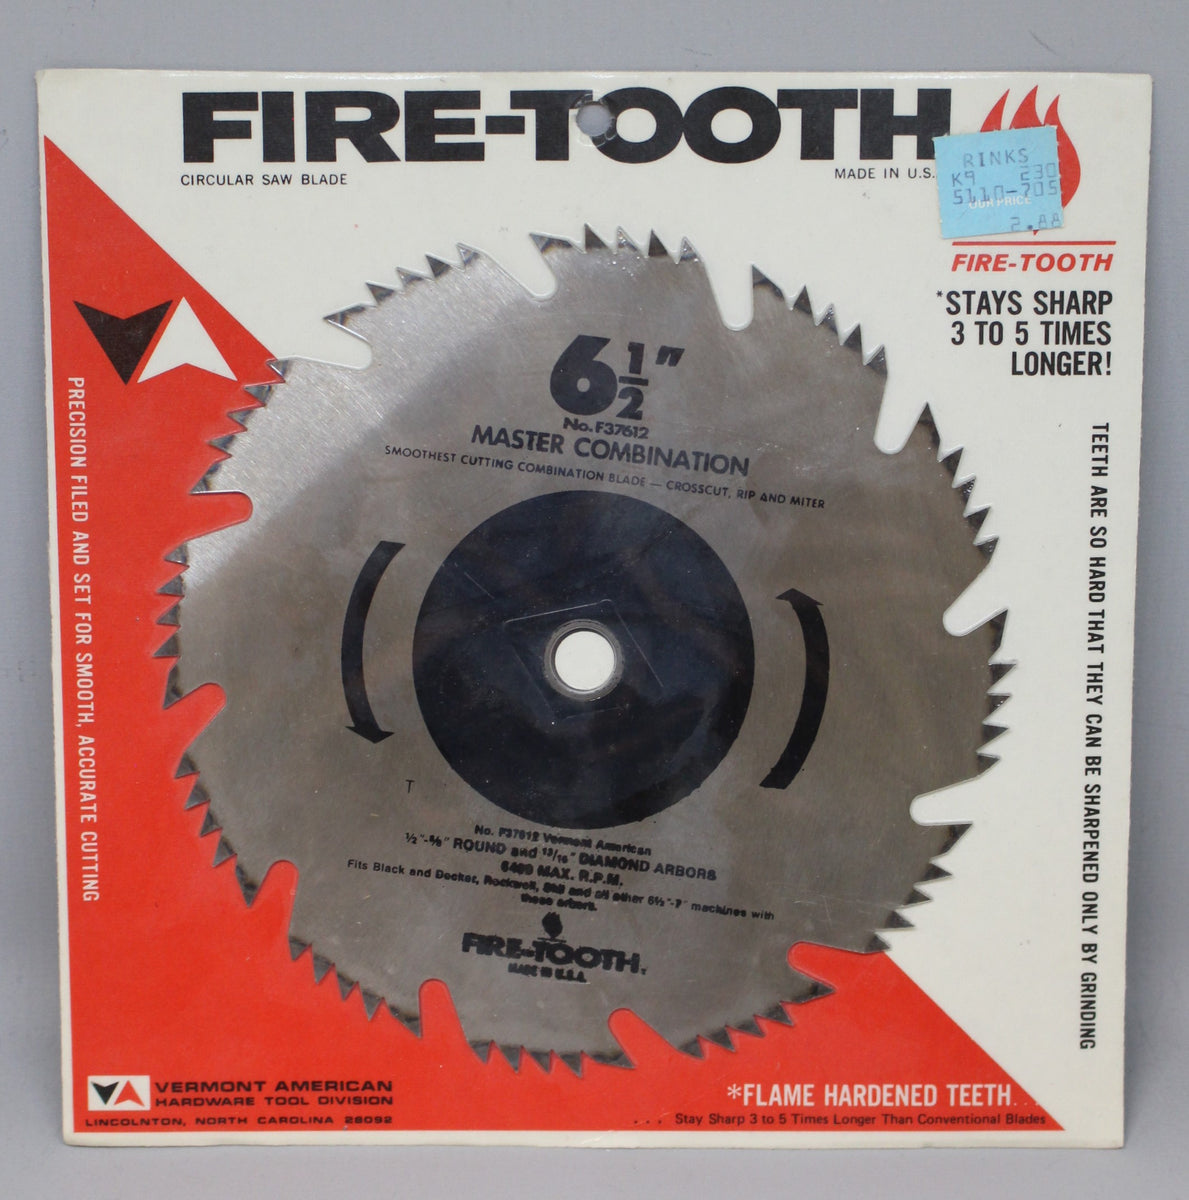 Fire-Tooth 6.5 Master Combination Circular Saw Blade - New